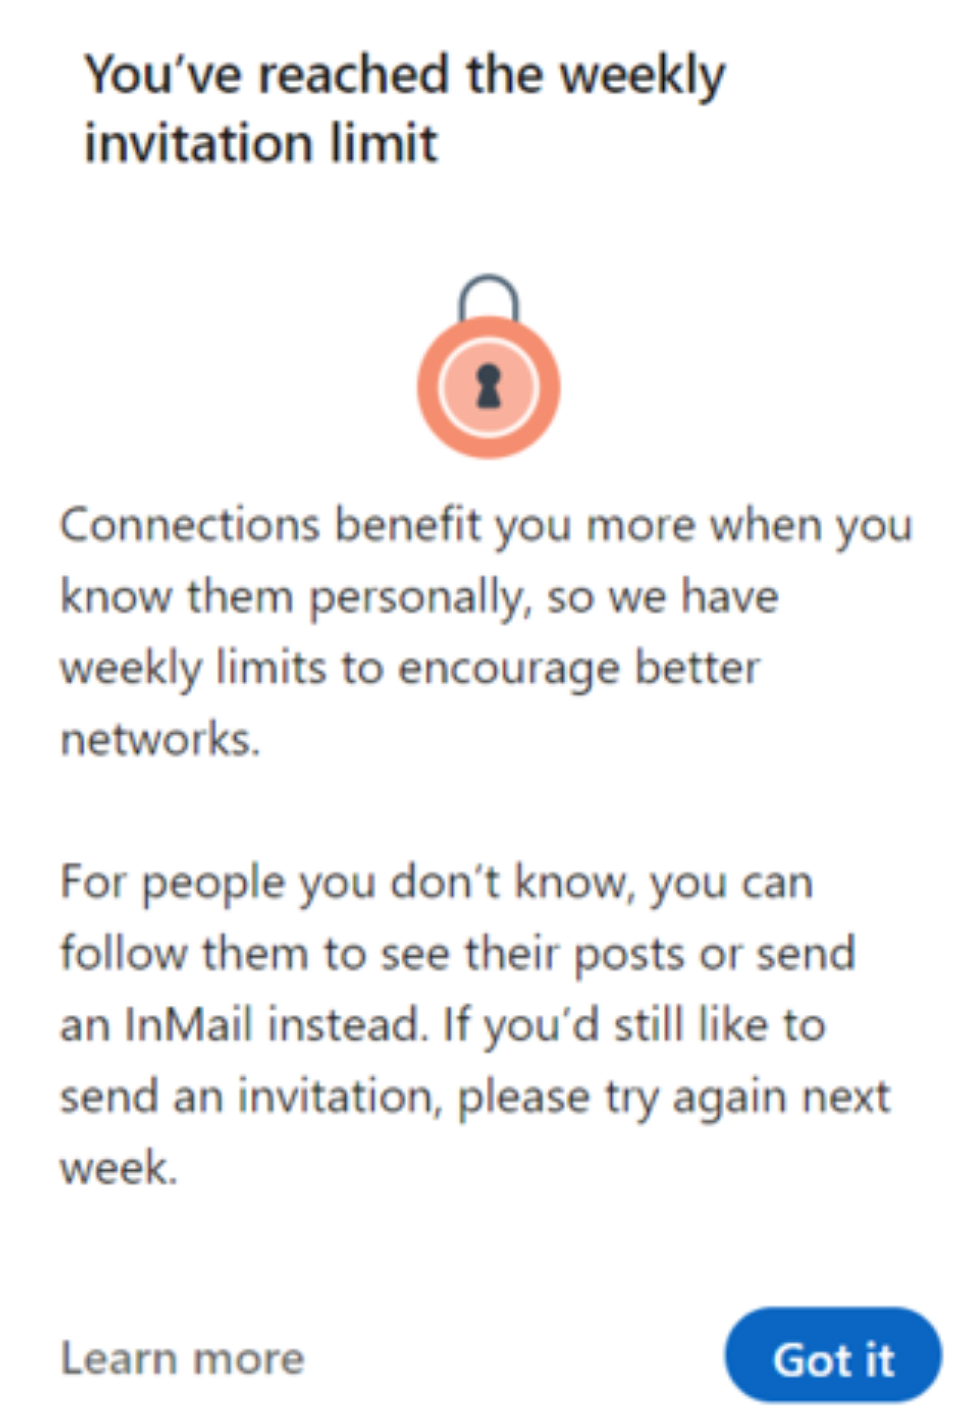 I'm getting "You've reached the weekly invitation limit" warning from